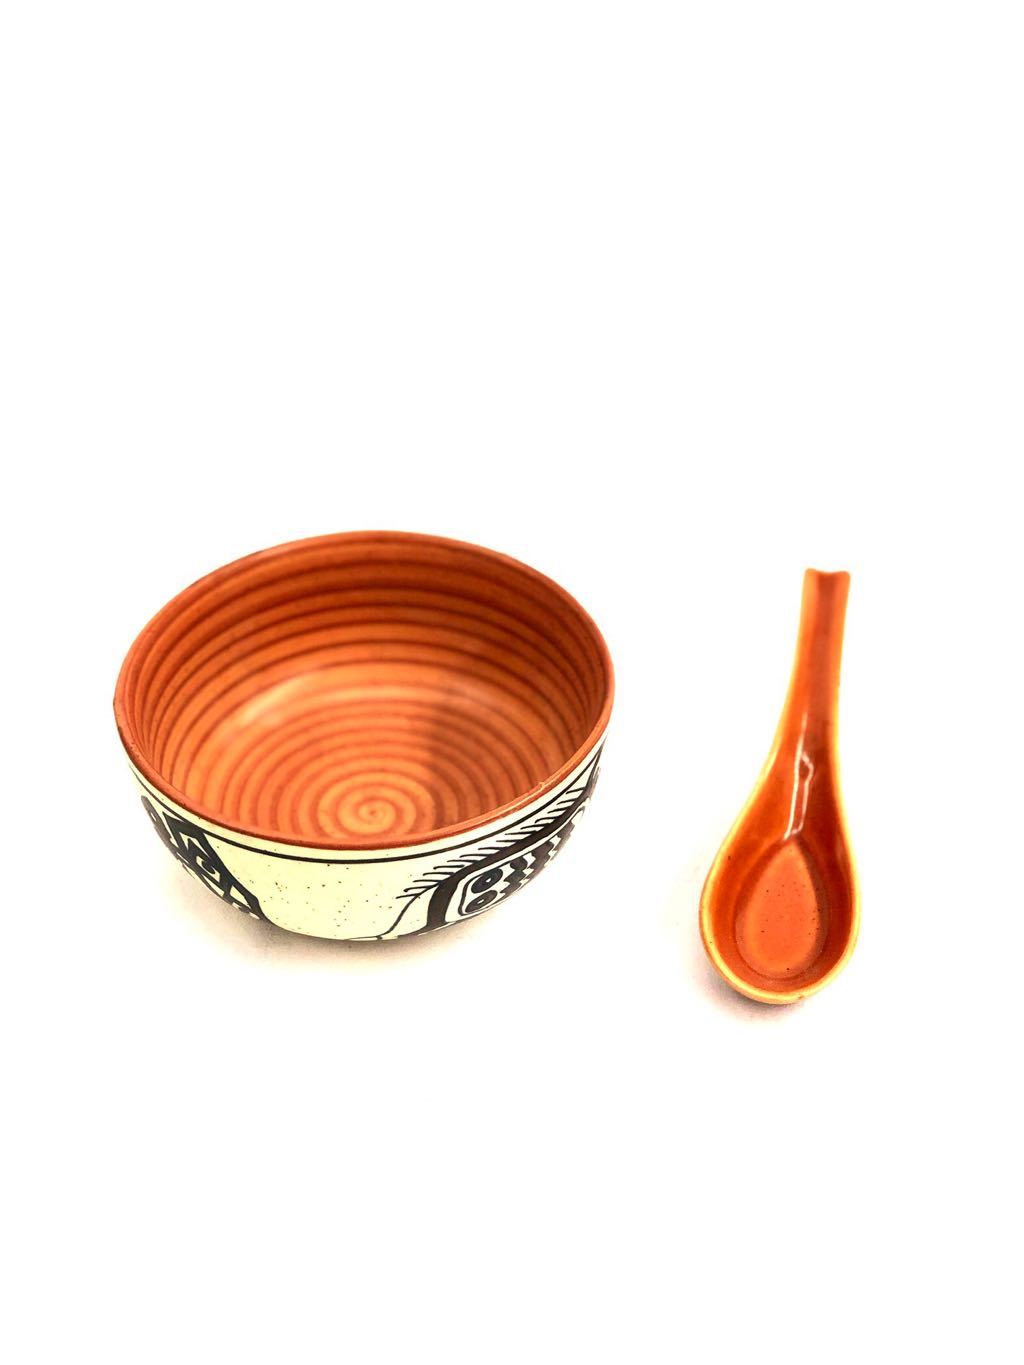 Designer Soup Bowl With Spoon Made Of Ceramic Dinning Utility Tamrapatra